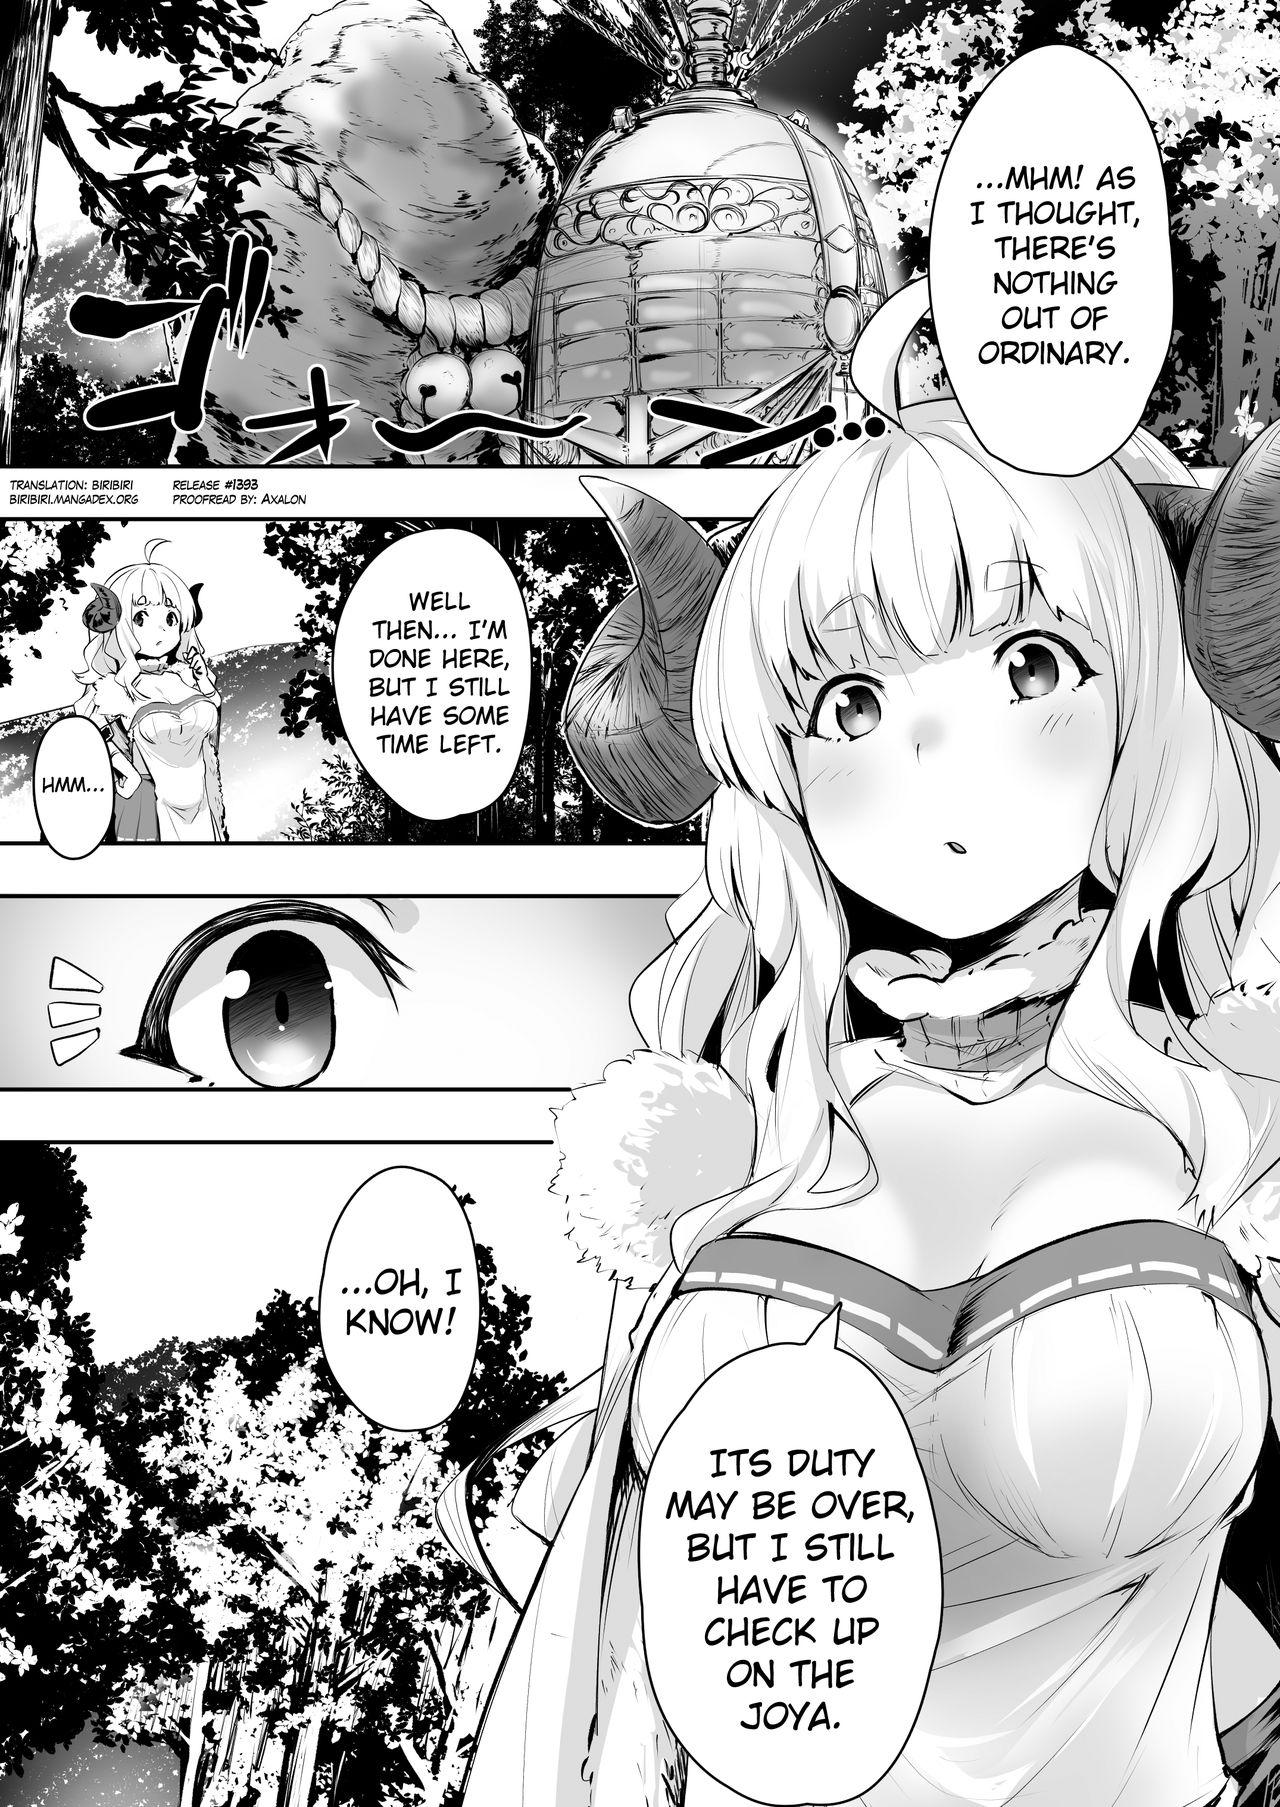 Blackmail Bonnou Aftercare | Aftercare of Carnal Desires - Granblue fantasy Analfucking - Page 2